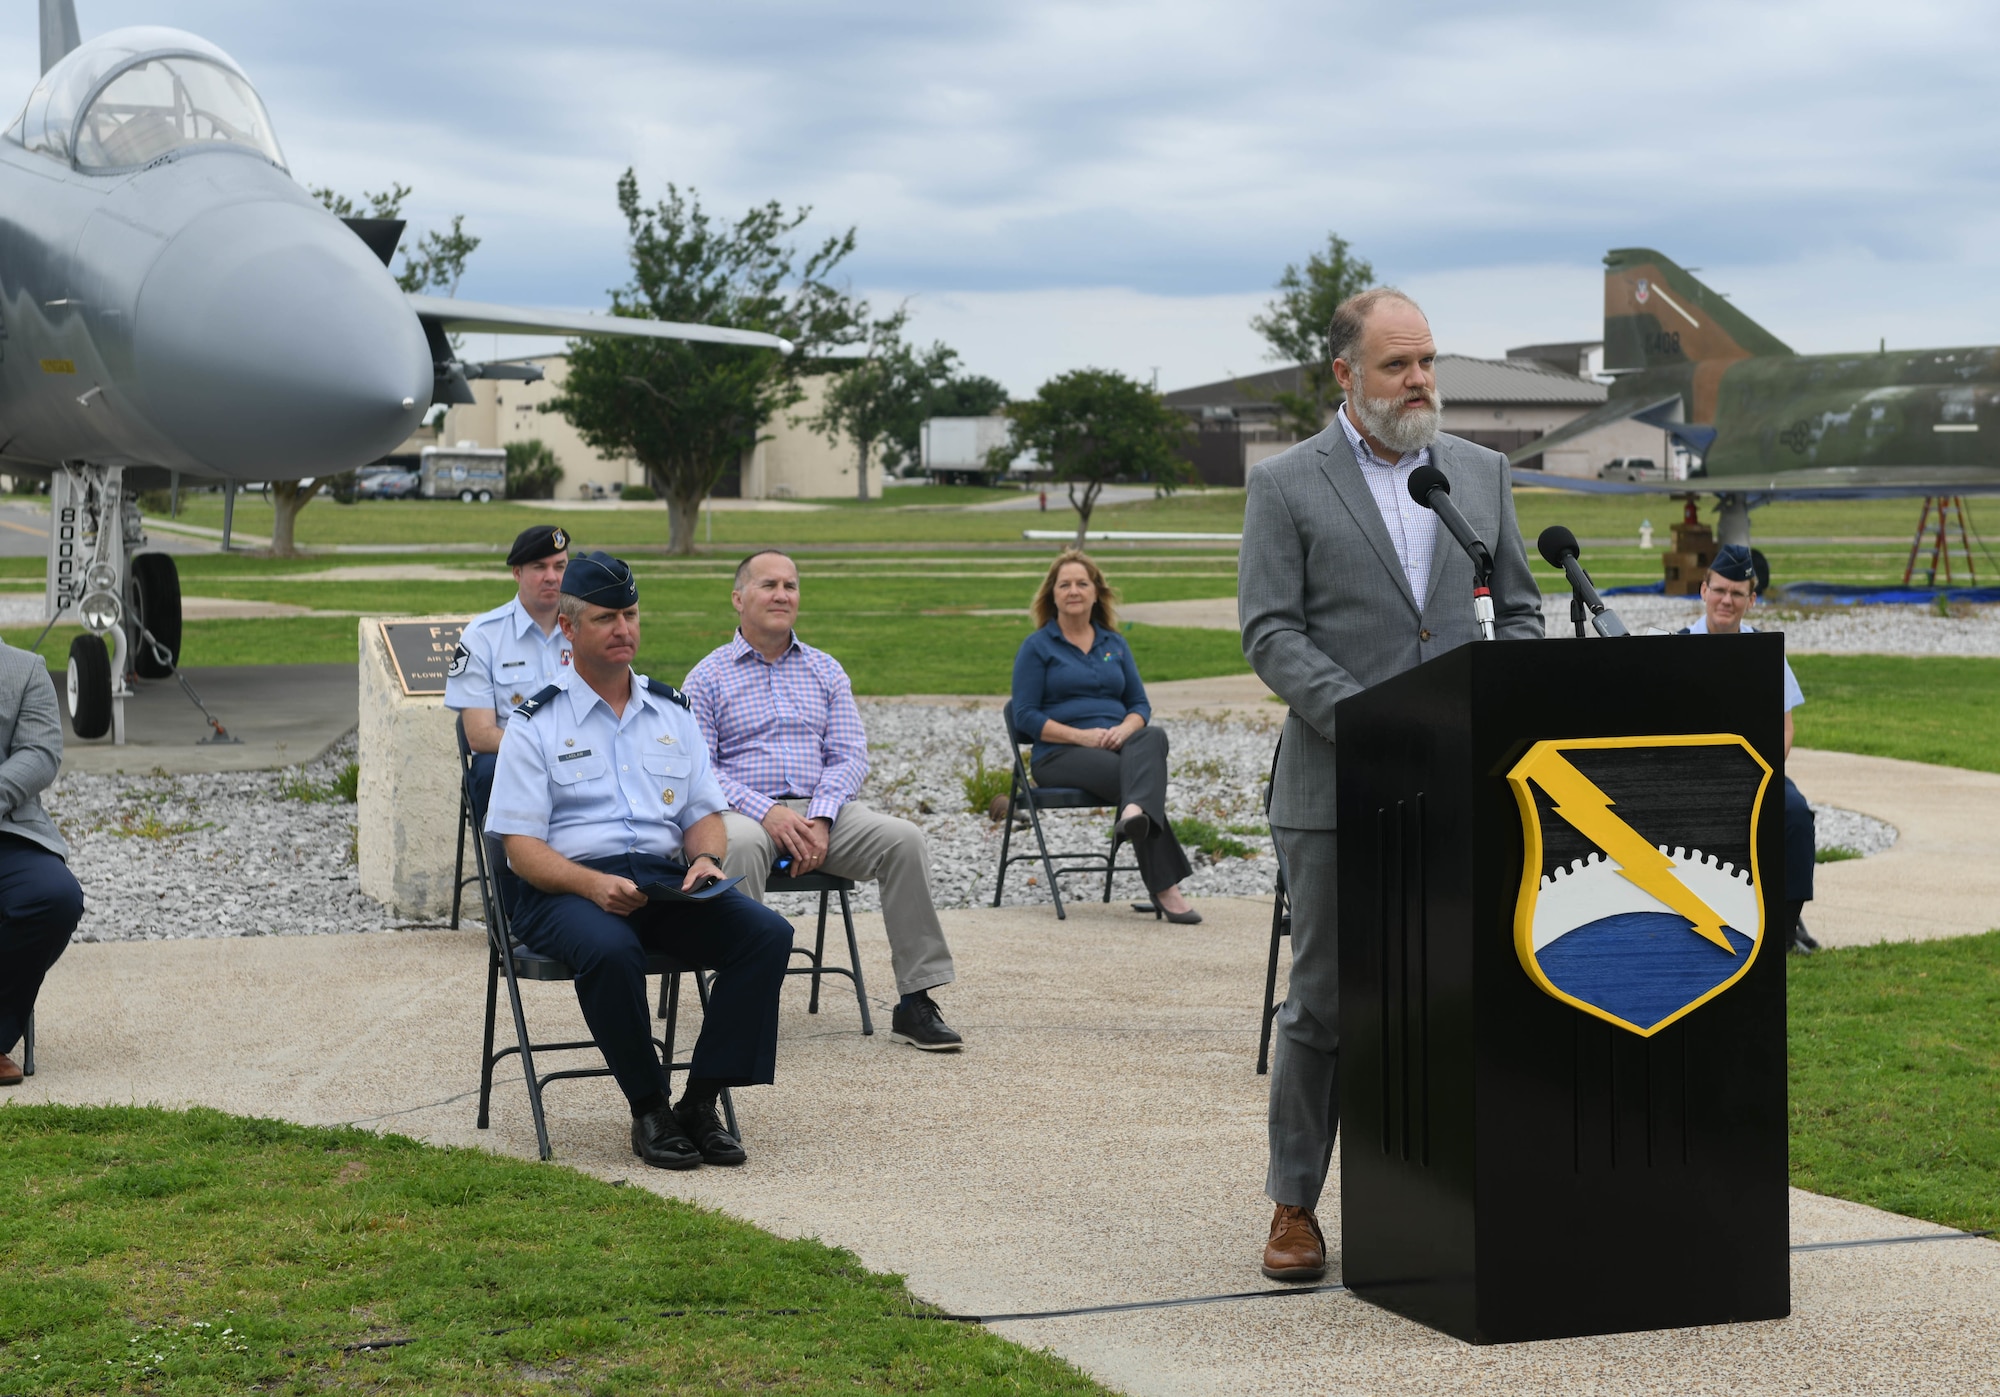 Will Cramer, Military Affairs Committee chairman, discusses the mutual benefits of the Community Partnership Program during a press conference at Tyndall Air Force Base, Florida, Jun. 17, 2020. The program promotes collaboration between the base and the local community. (U.S. Air Force photo by Airman Anabel Del Valle)